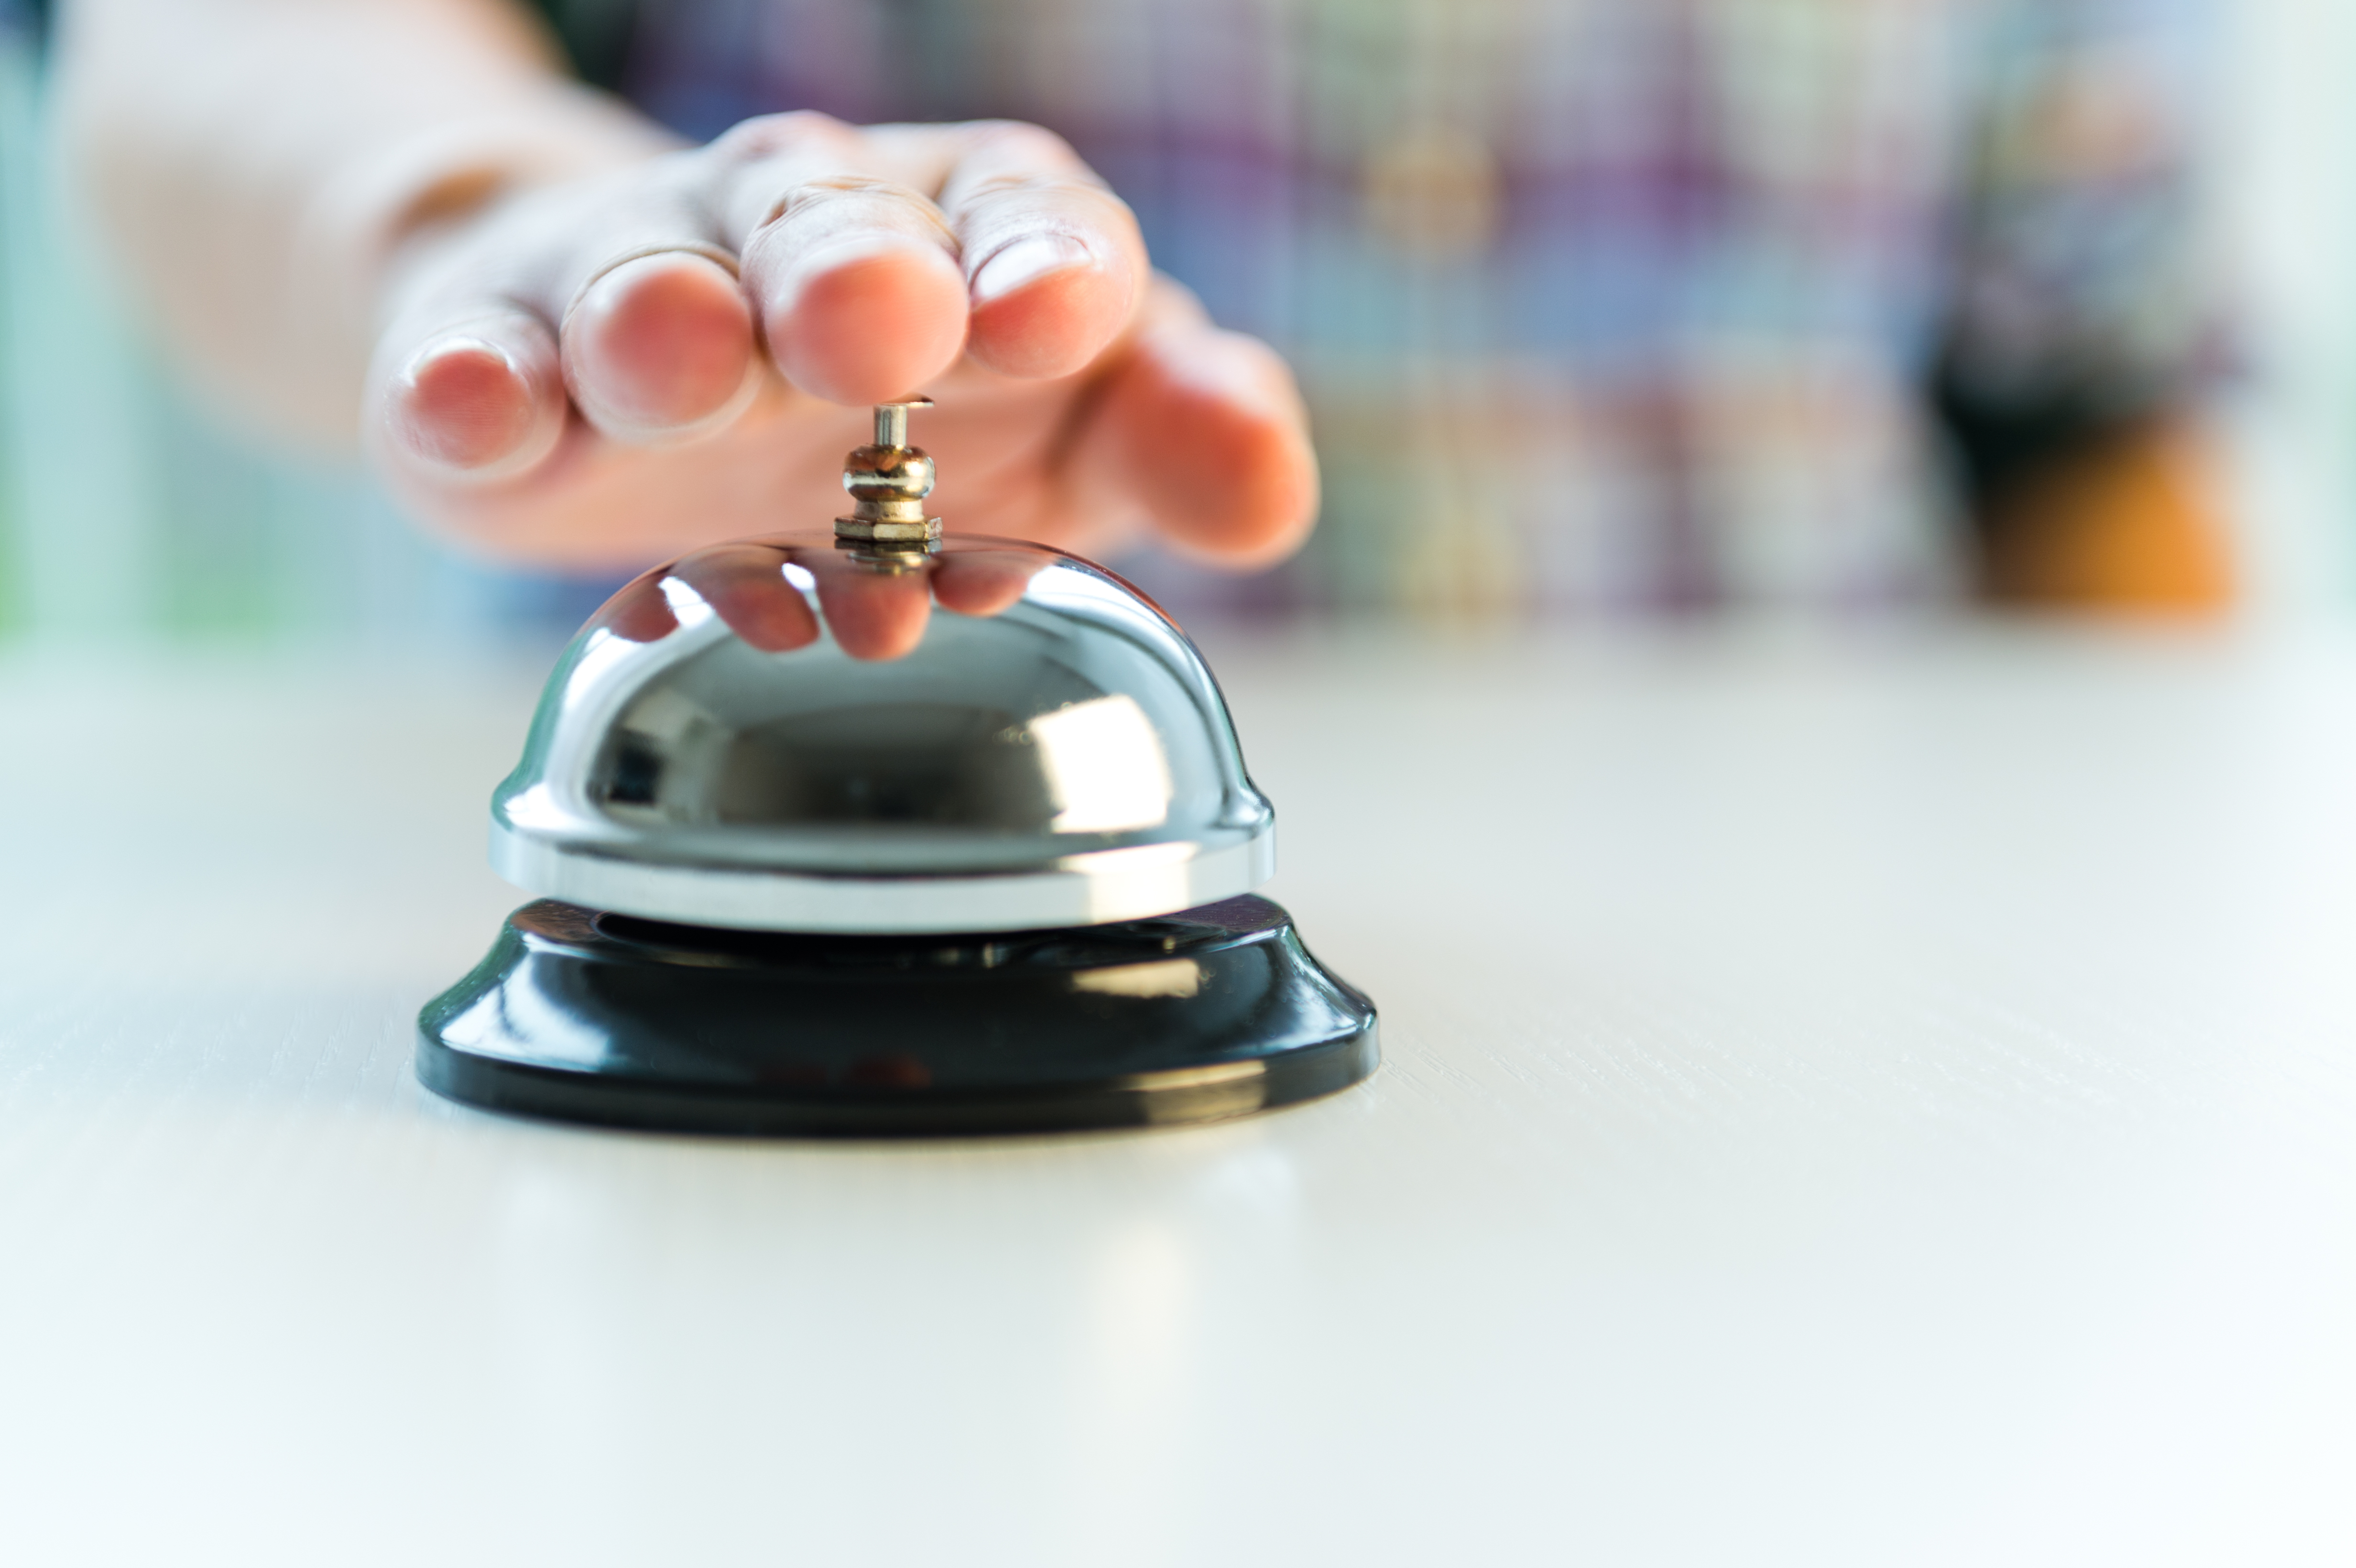 Hotel service bell with customers hand 